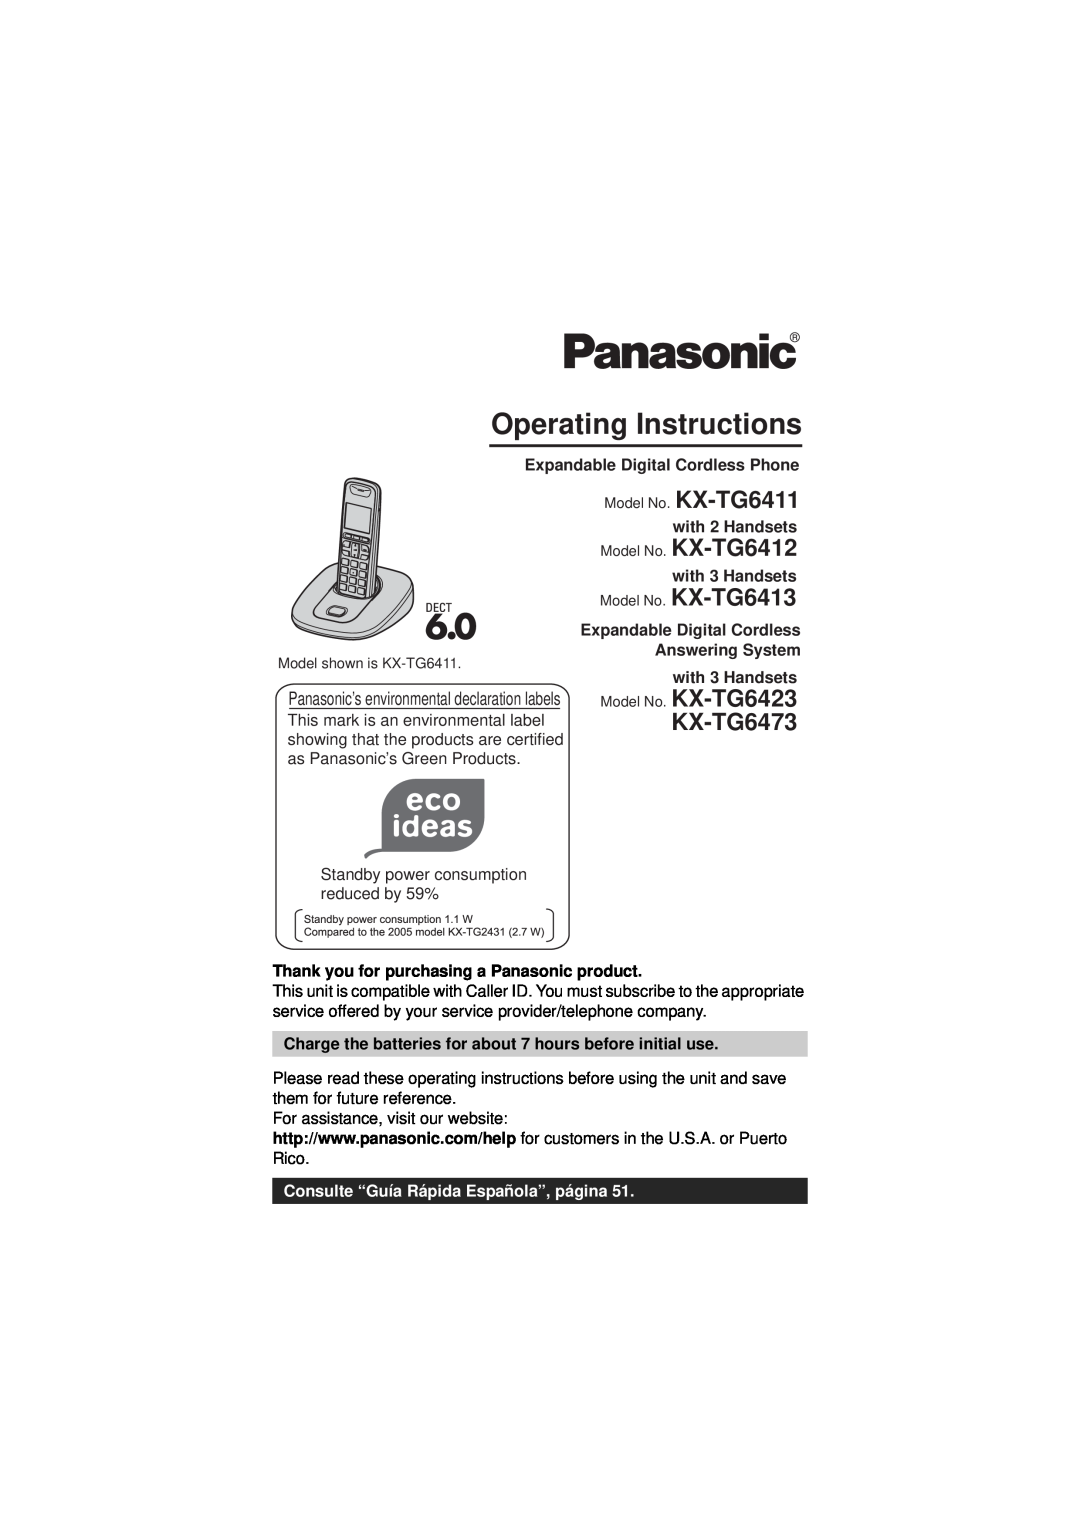 Panasonic KX-TG6411 operating instructions KX-TG6473, Expandable Digital Cordless Phone, with 2 Handsets, with 3 Handsets 